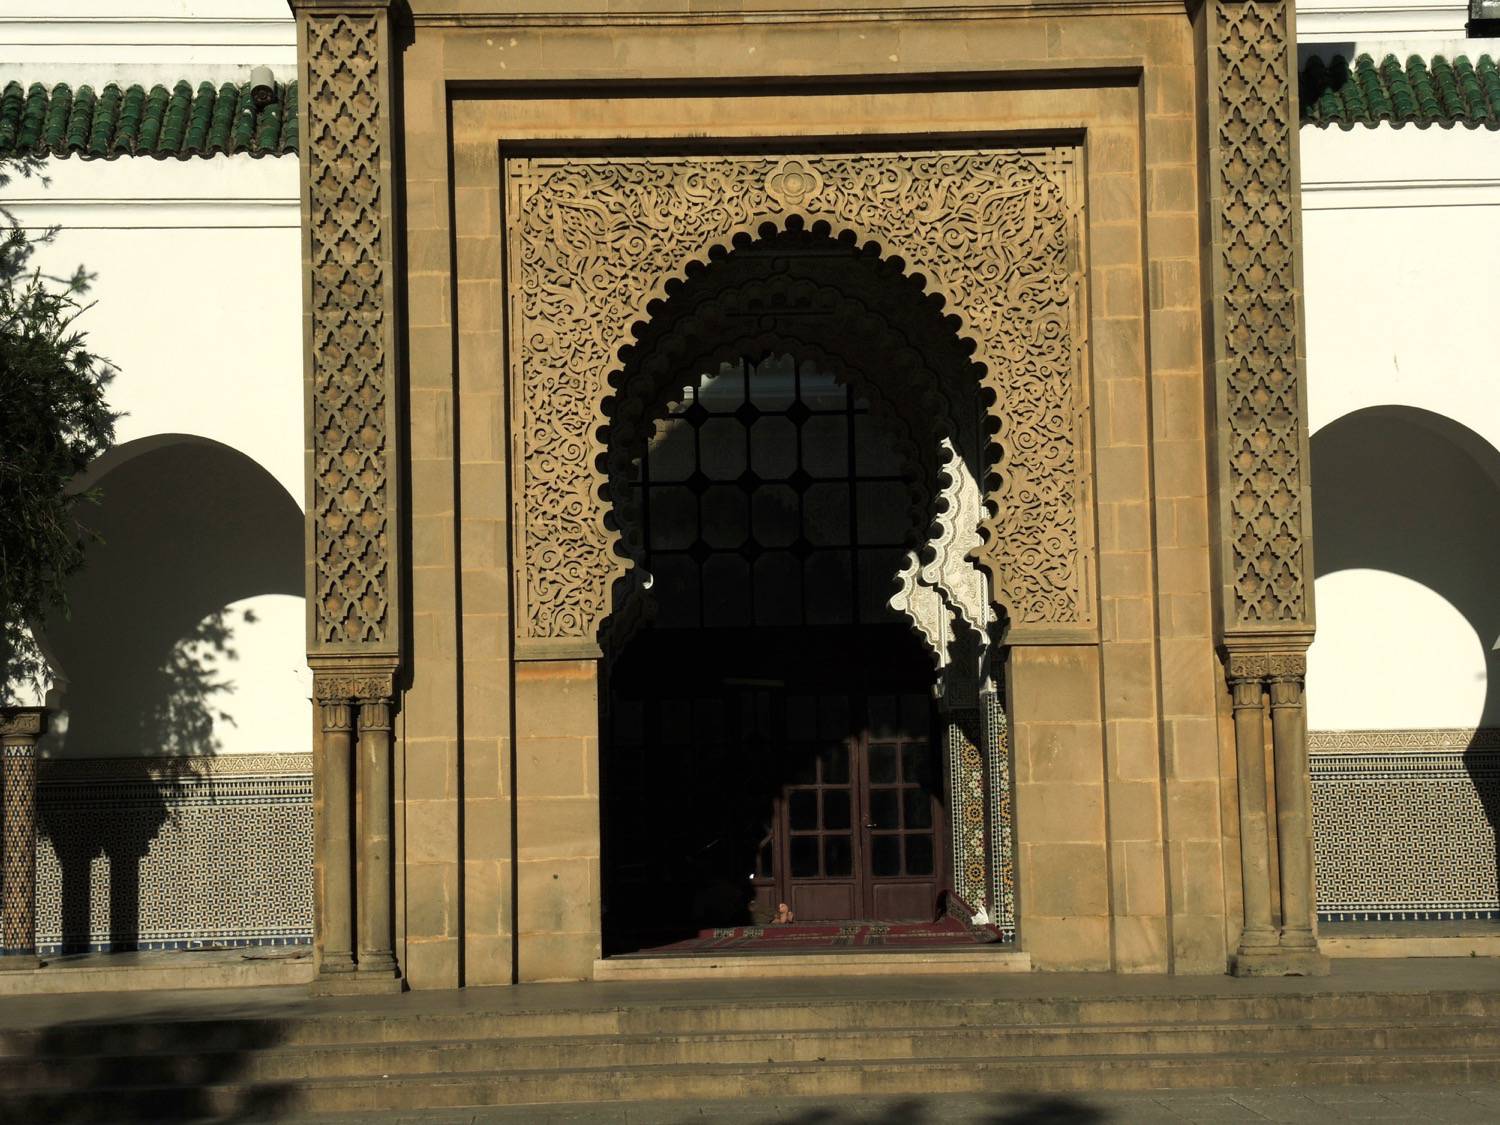 Exterior view of the Portal on Avenue Sidi Mohammed Ben Abdallah